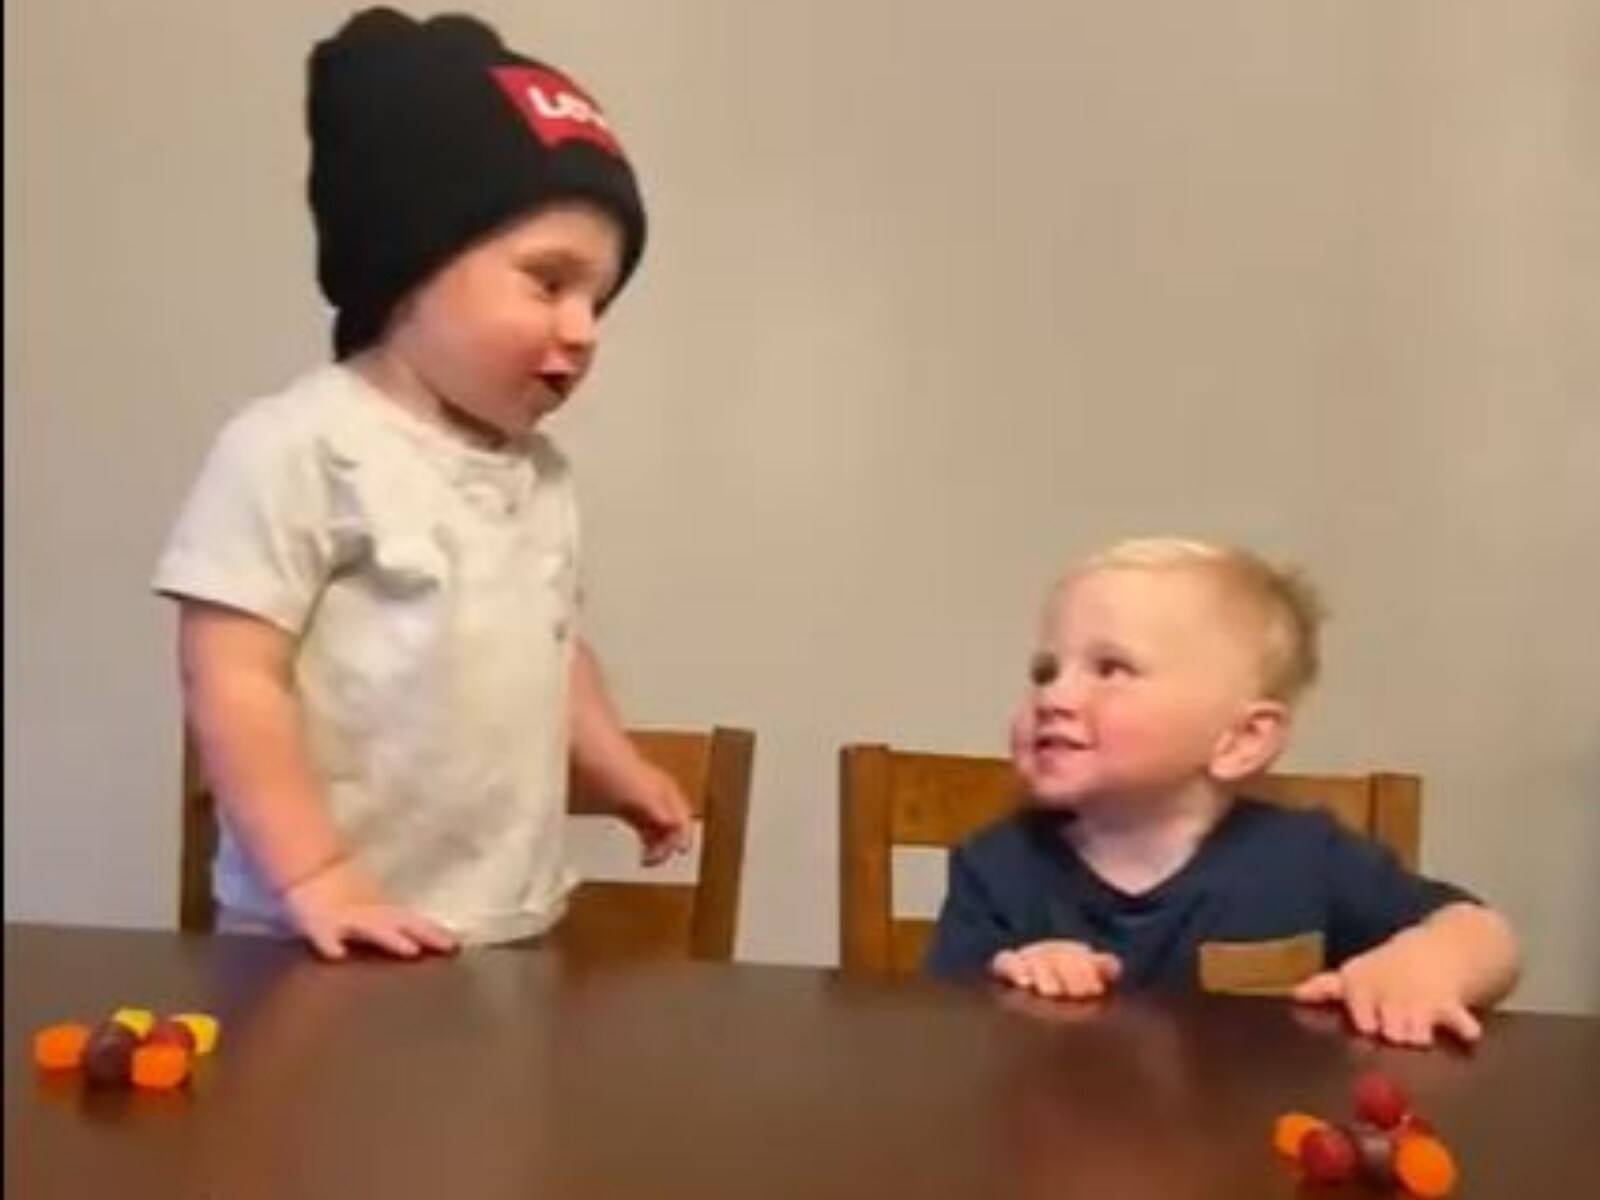 WATCH: Two Toddlers Eat Forbidden Candy, Do a 'Good Food Dance' in Cute  Video